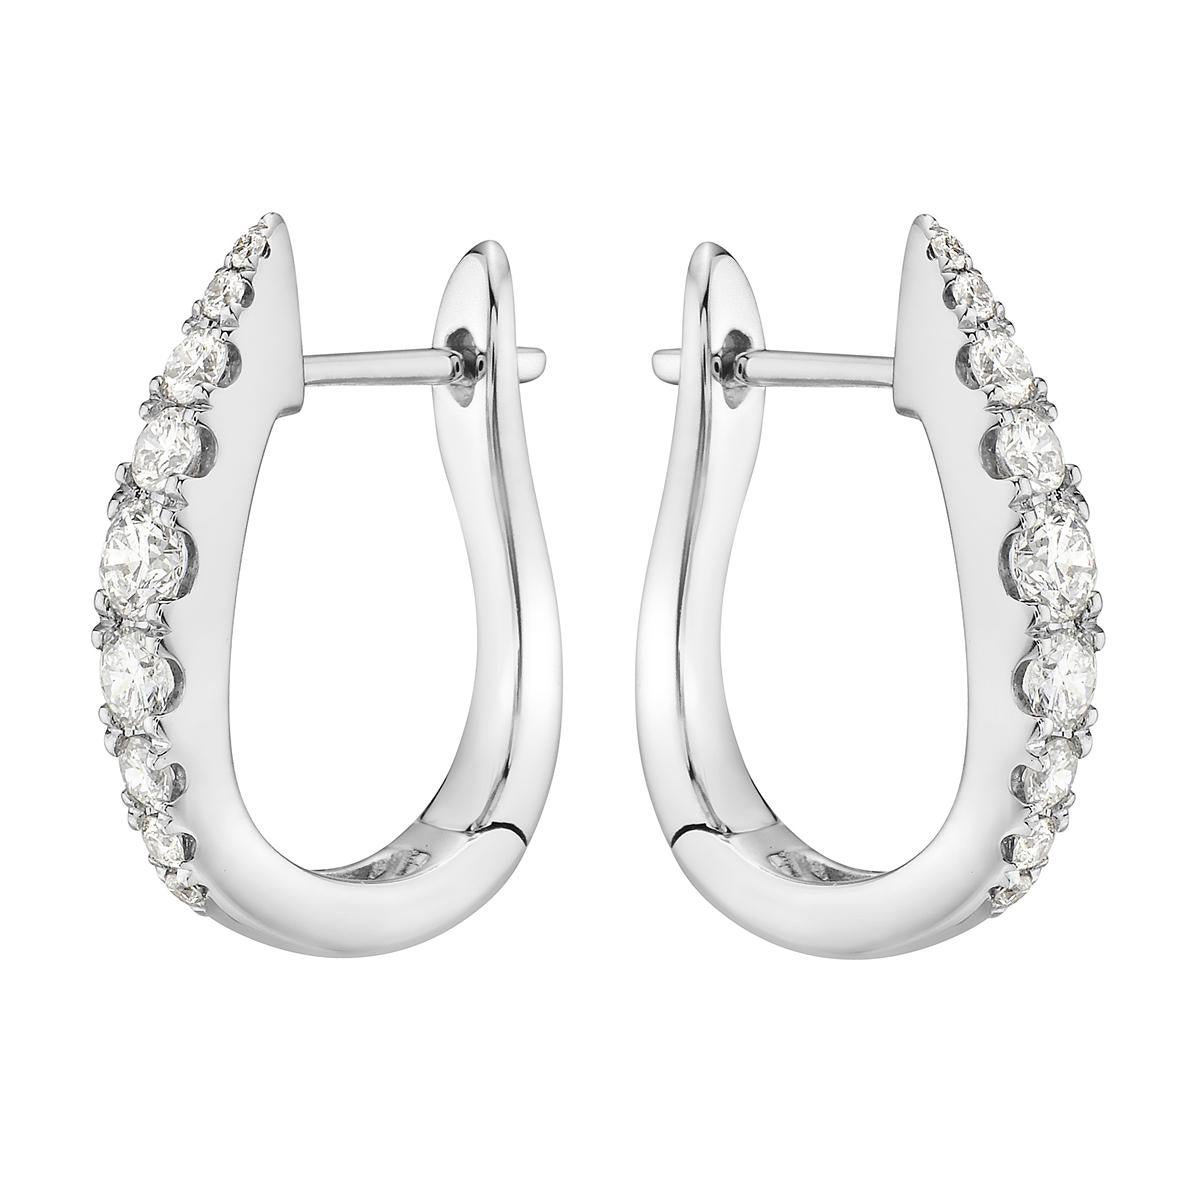 With these exquisite white hoop earrings, style and glamour are in the spotlight. These 18-carat earrings are made from 3.5 grams of gold. These earrings are adorned with VS2, G color diamonds, made out of 18 diamonds totaling 0.55 carats.